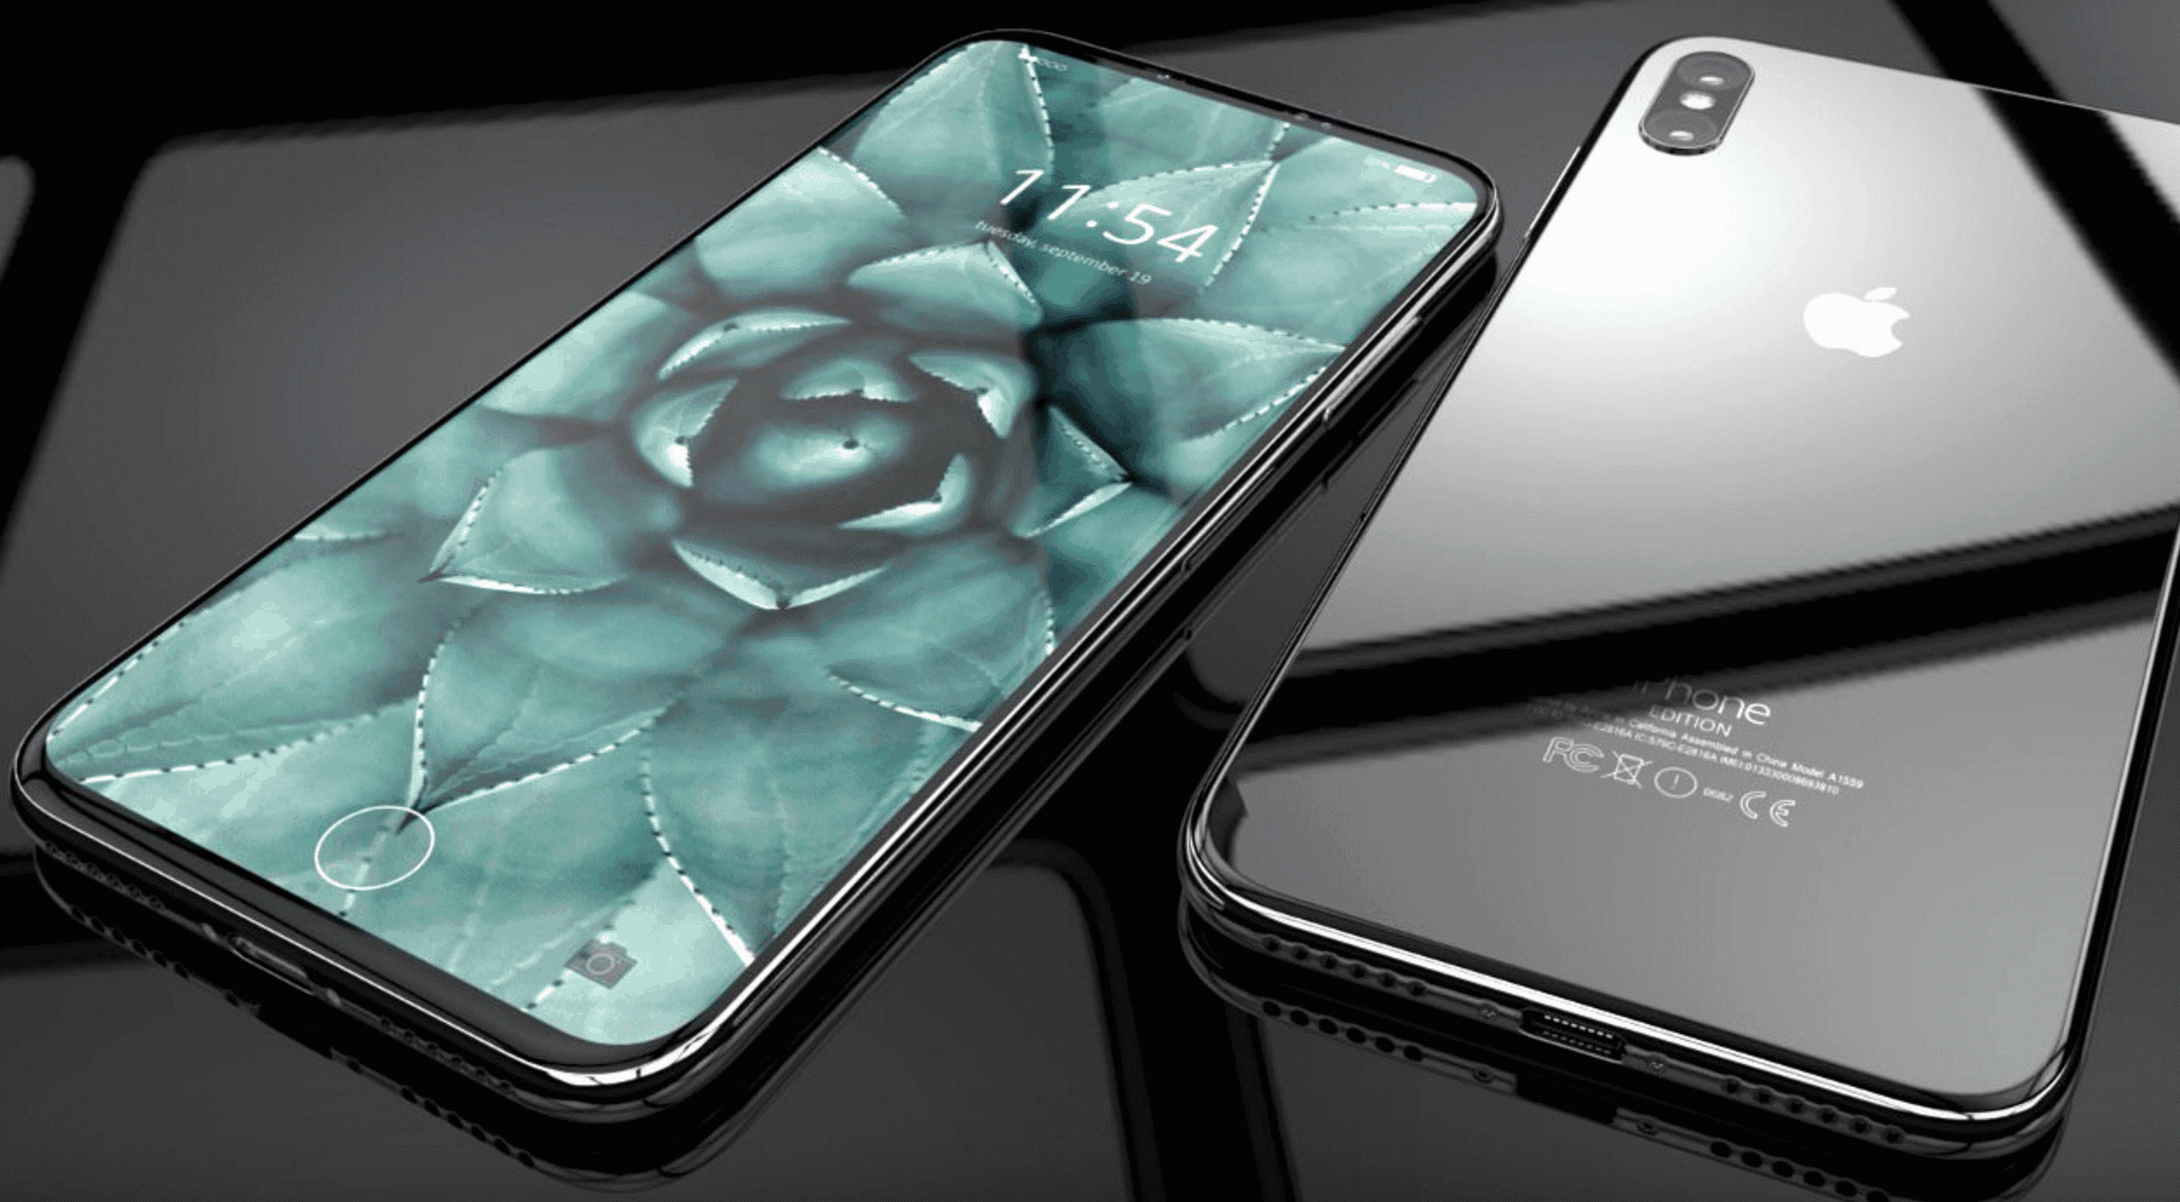 What's new in iphone 8 and what are the differences from iphone 7 and 6